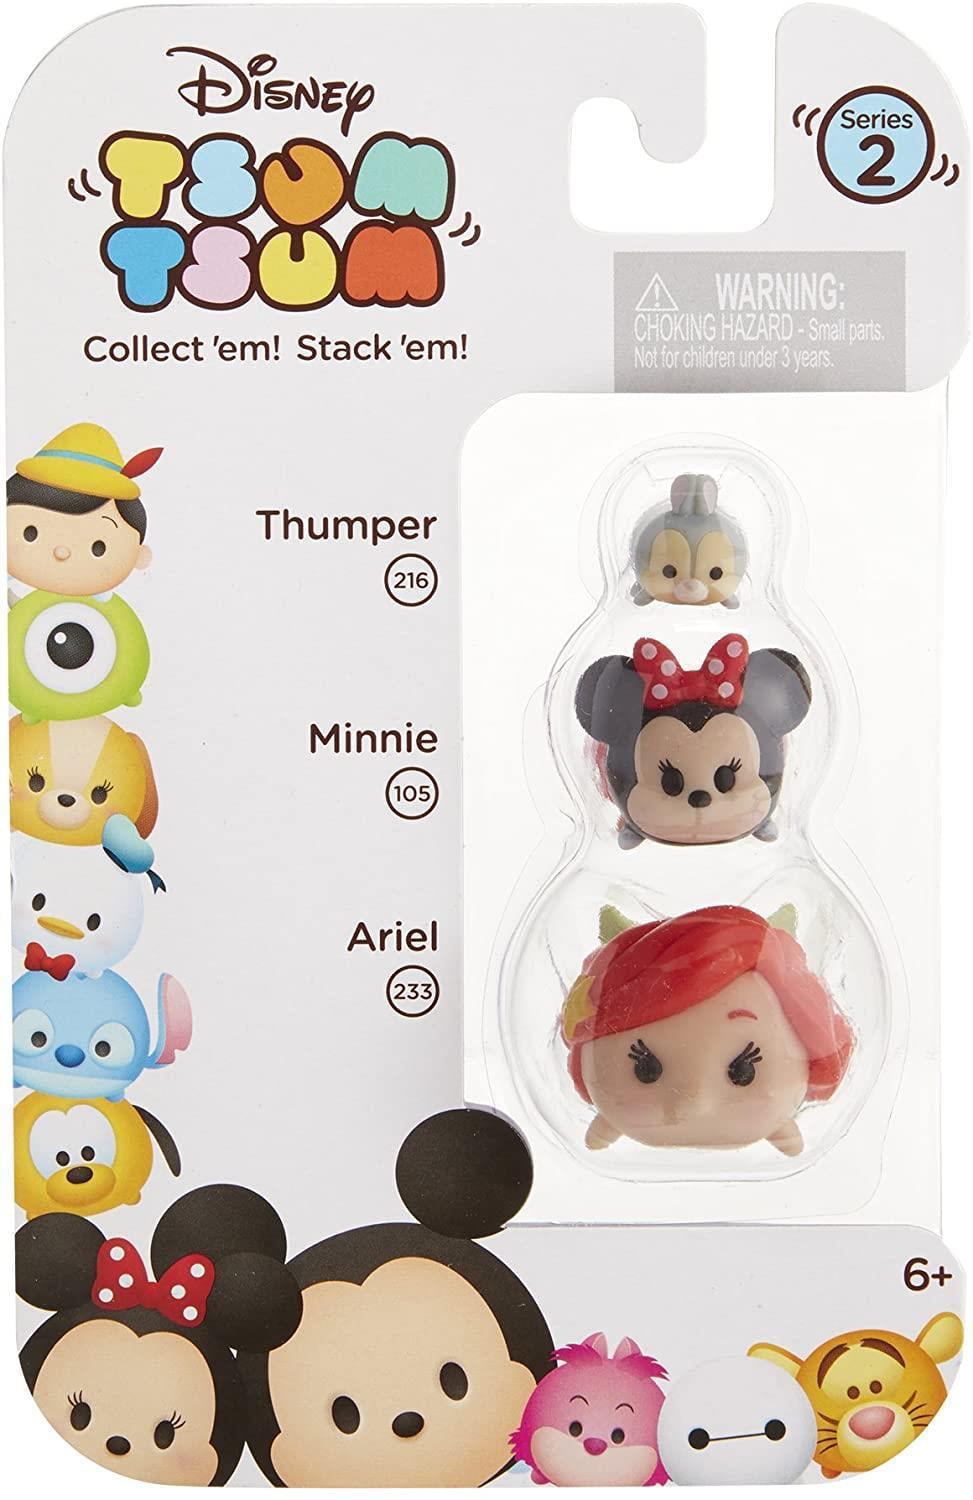 3 Minnie Mouse 4-Pack Mickey and 1 Disney Tsum Tsum 3.5 